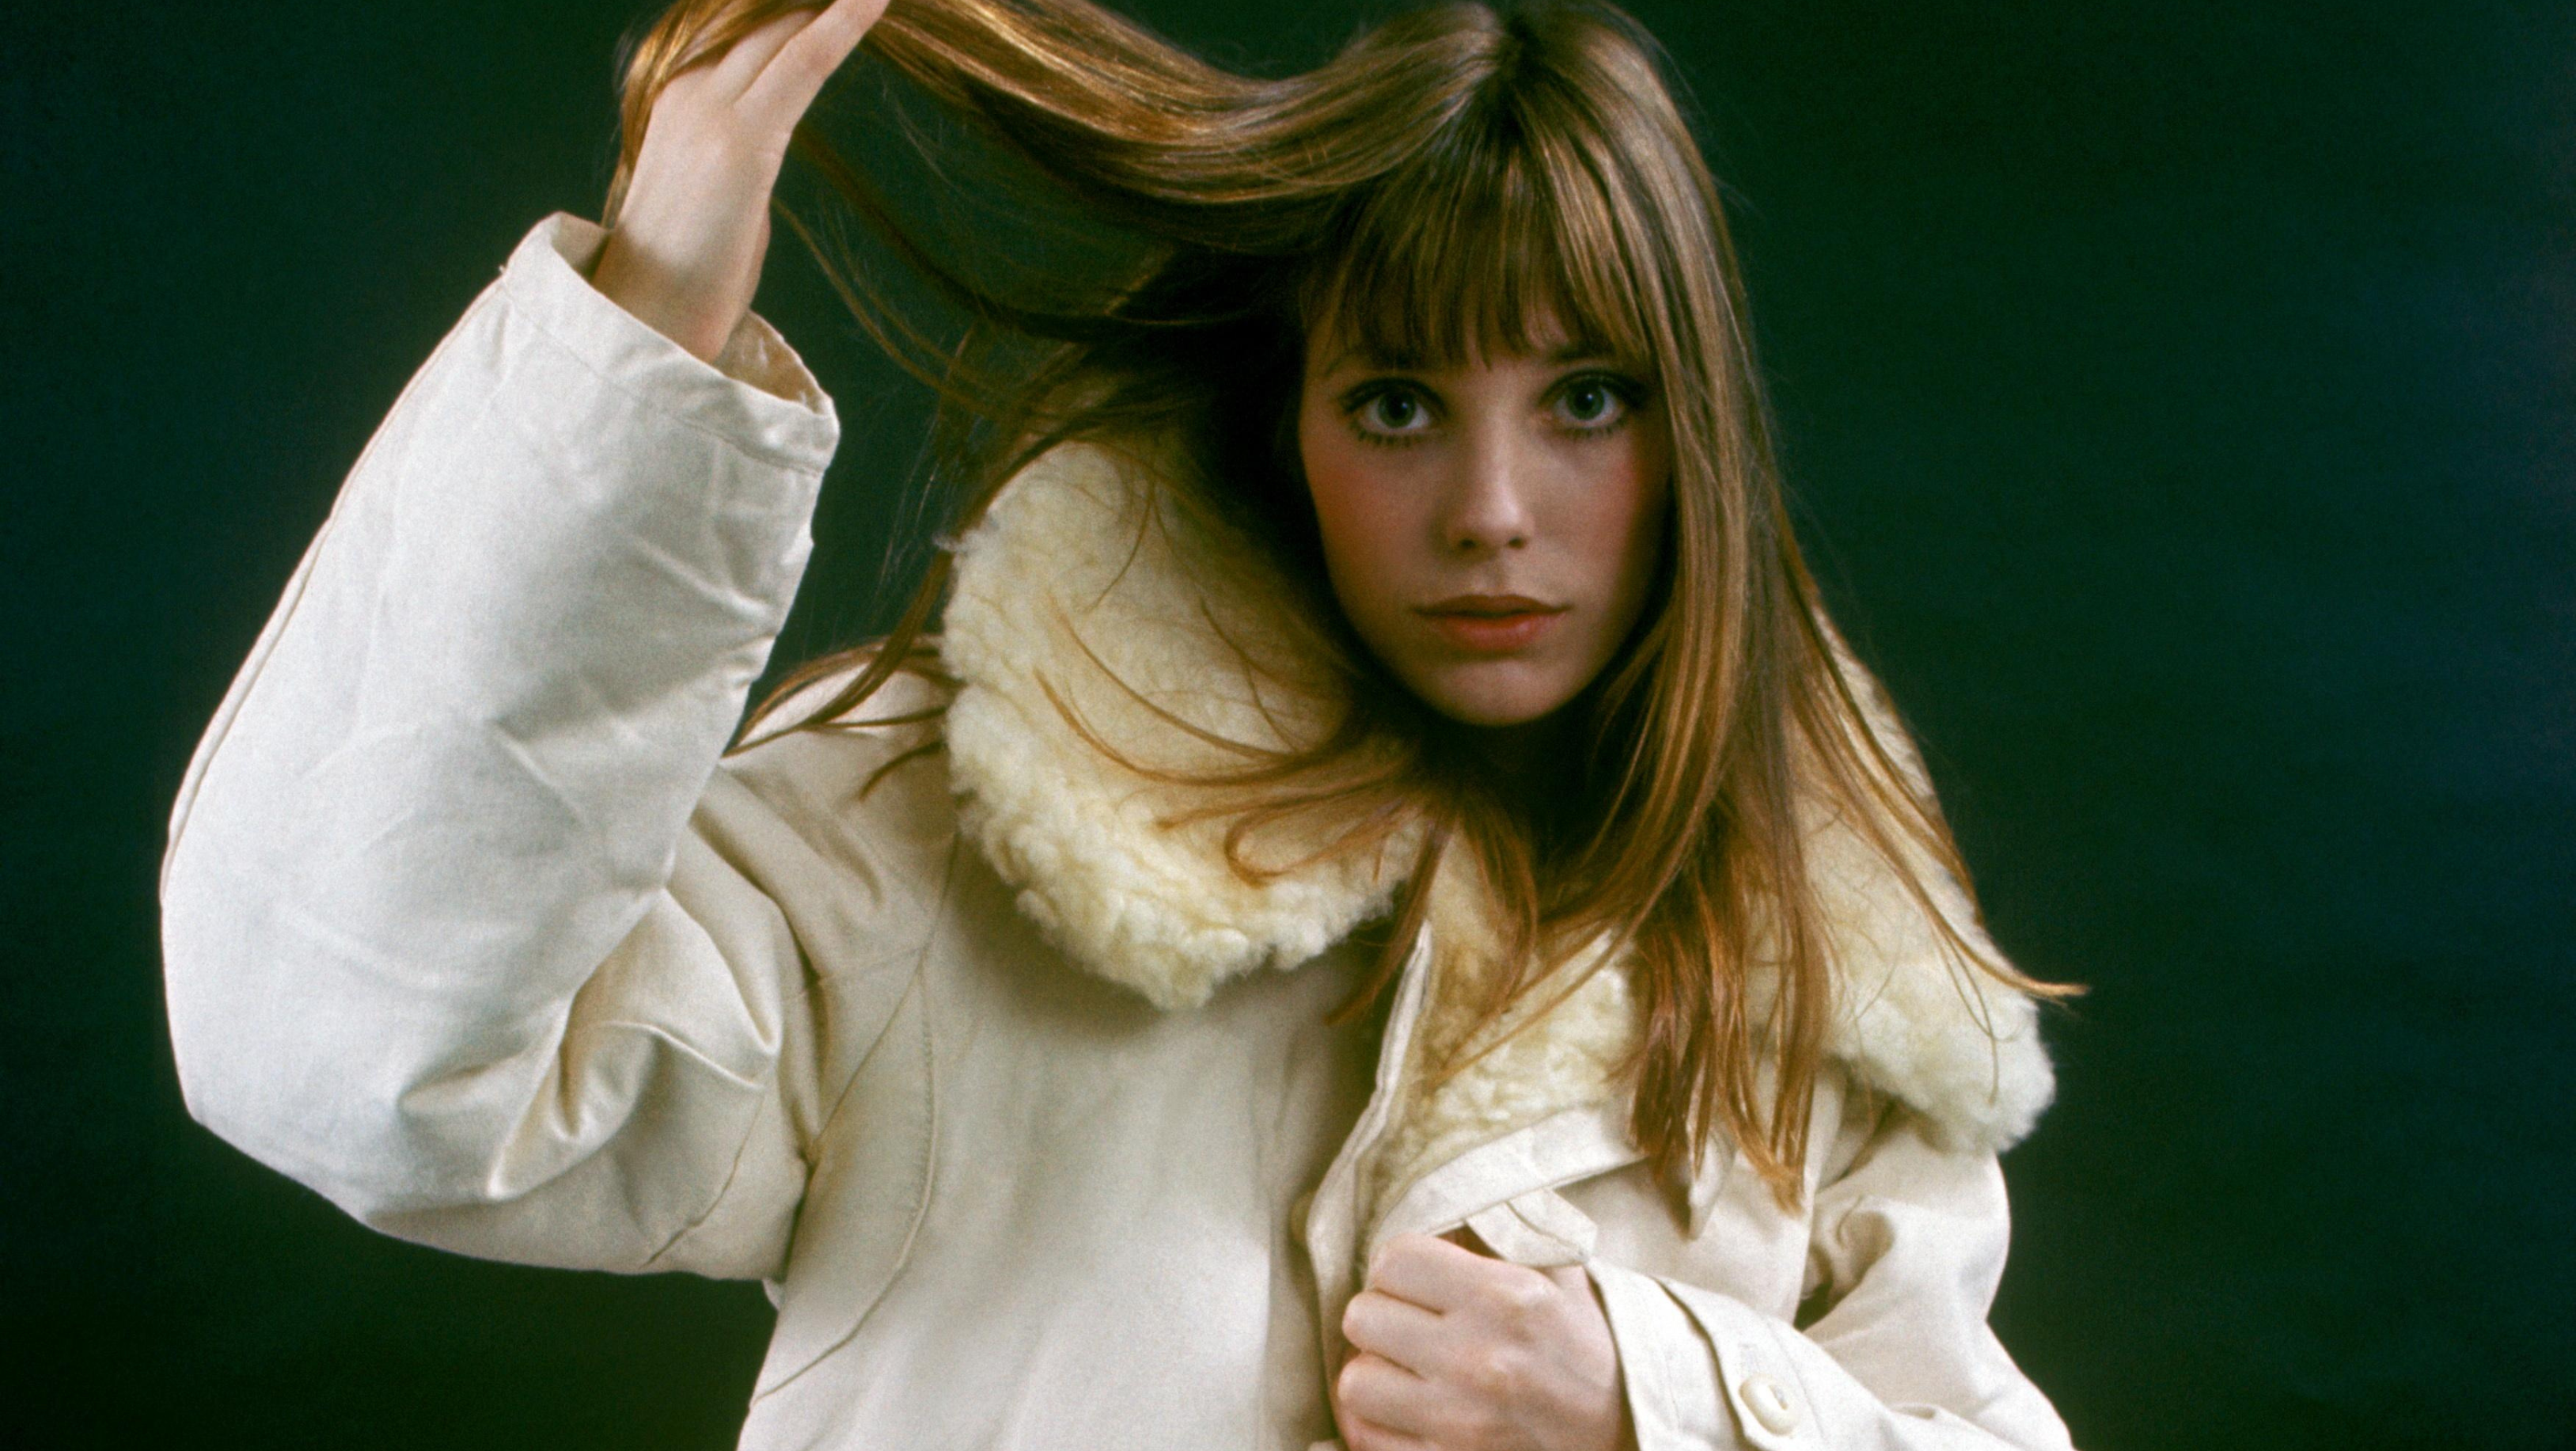 The Life Of An Icon: Who Was Jane Birkin?